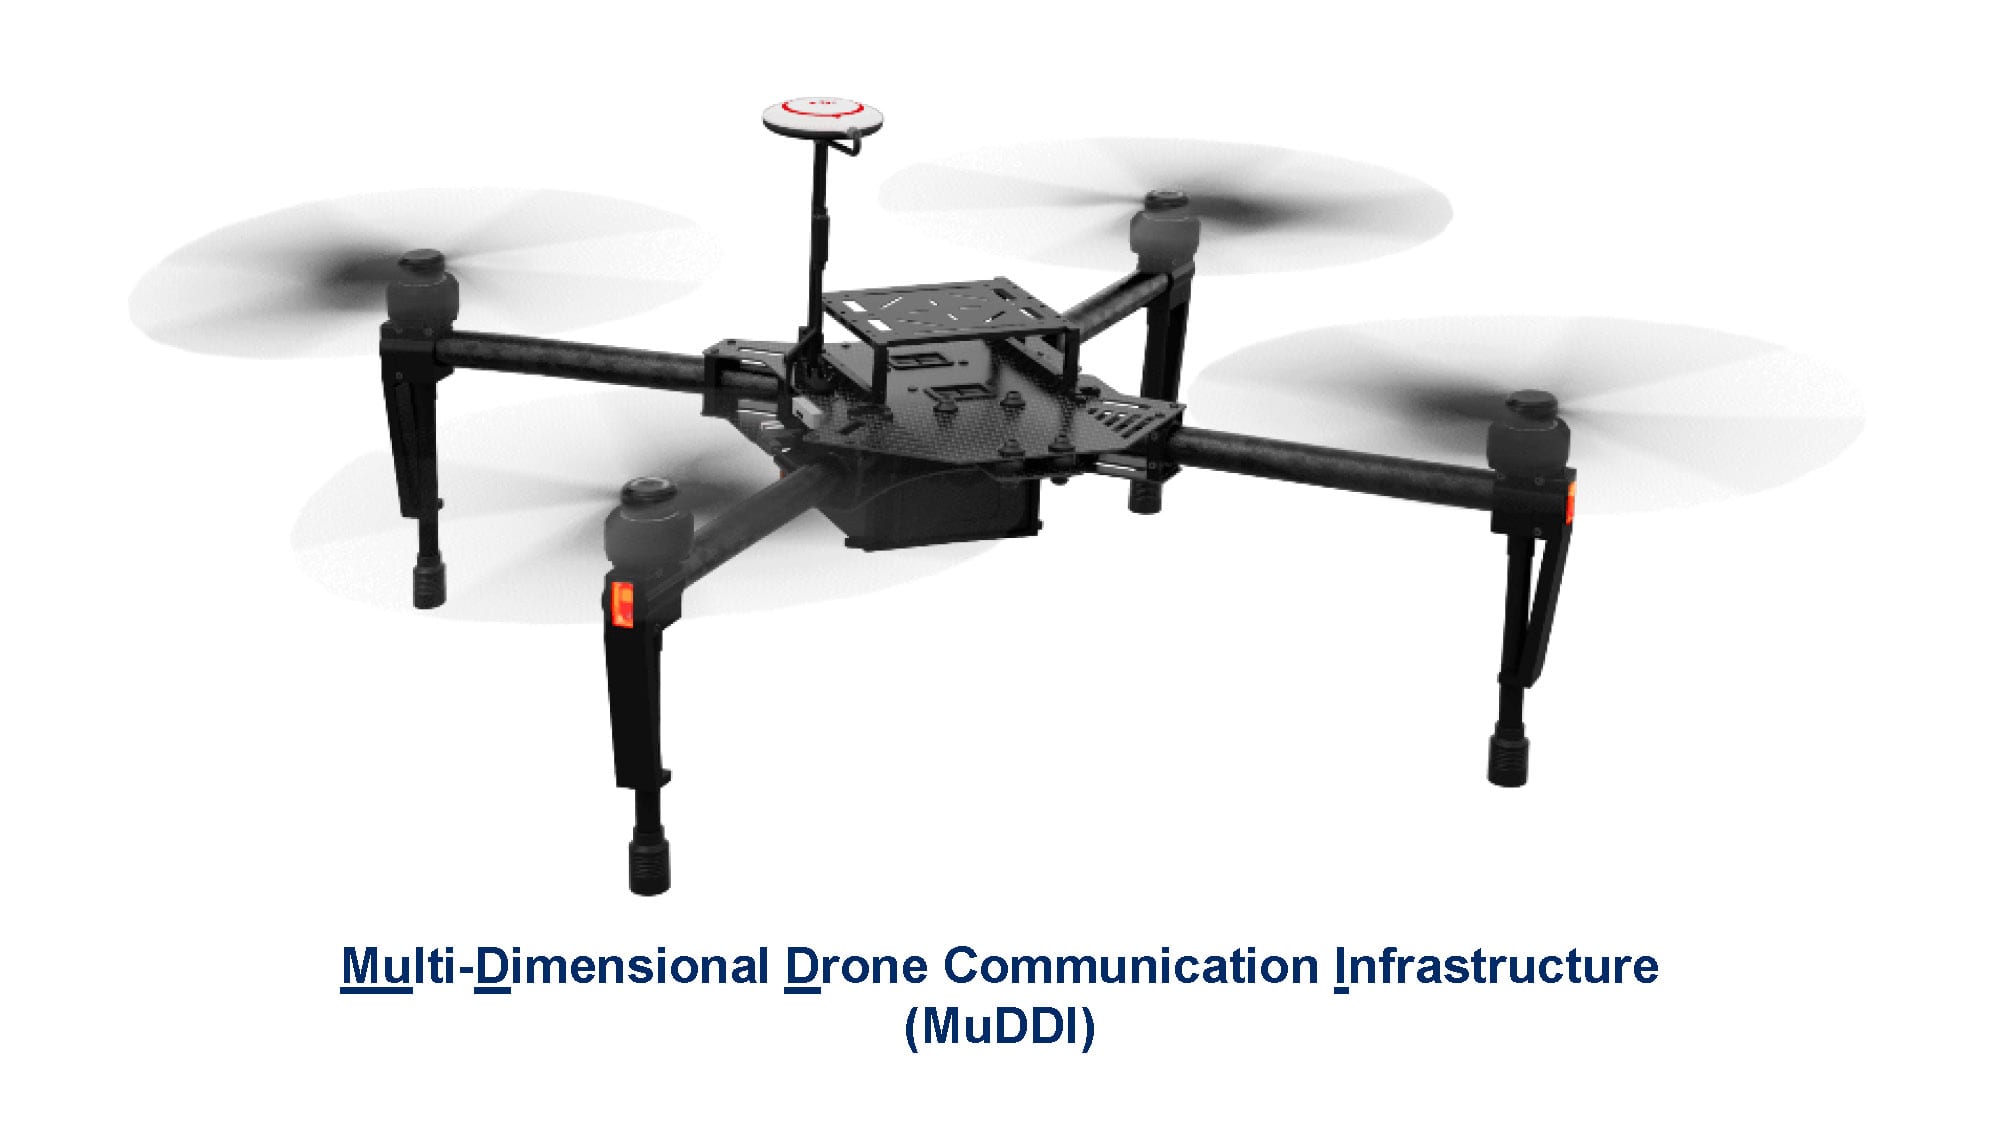 SMU Engineering Profs Receive NSF Grant to Build Multi-Dimensional Drone Communication Framework